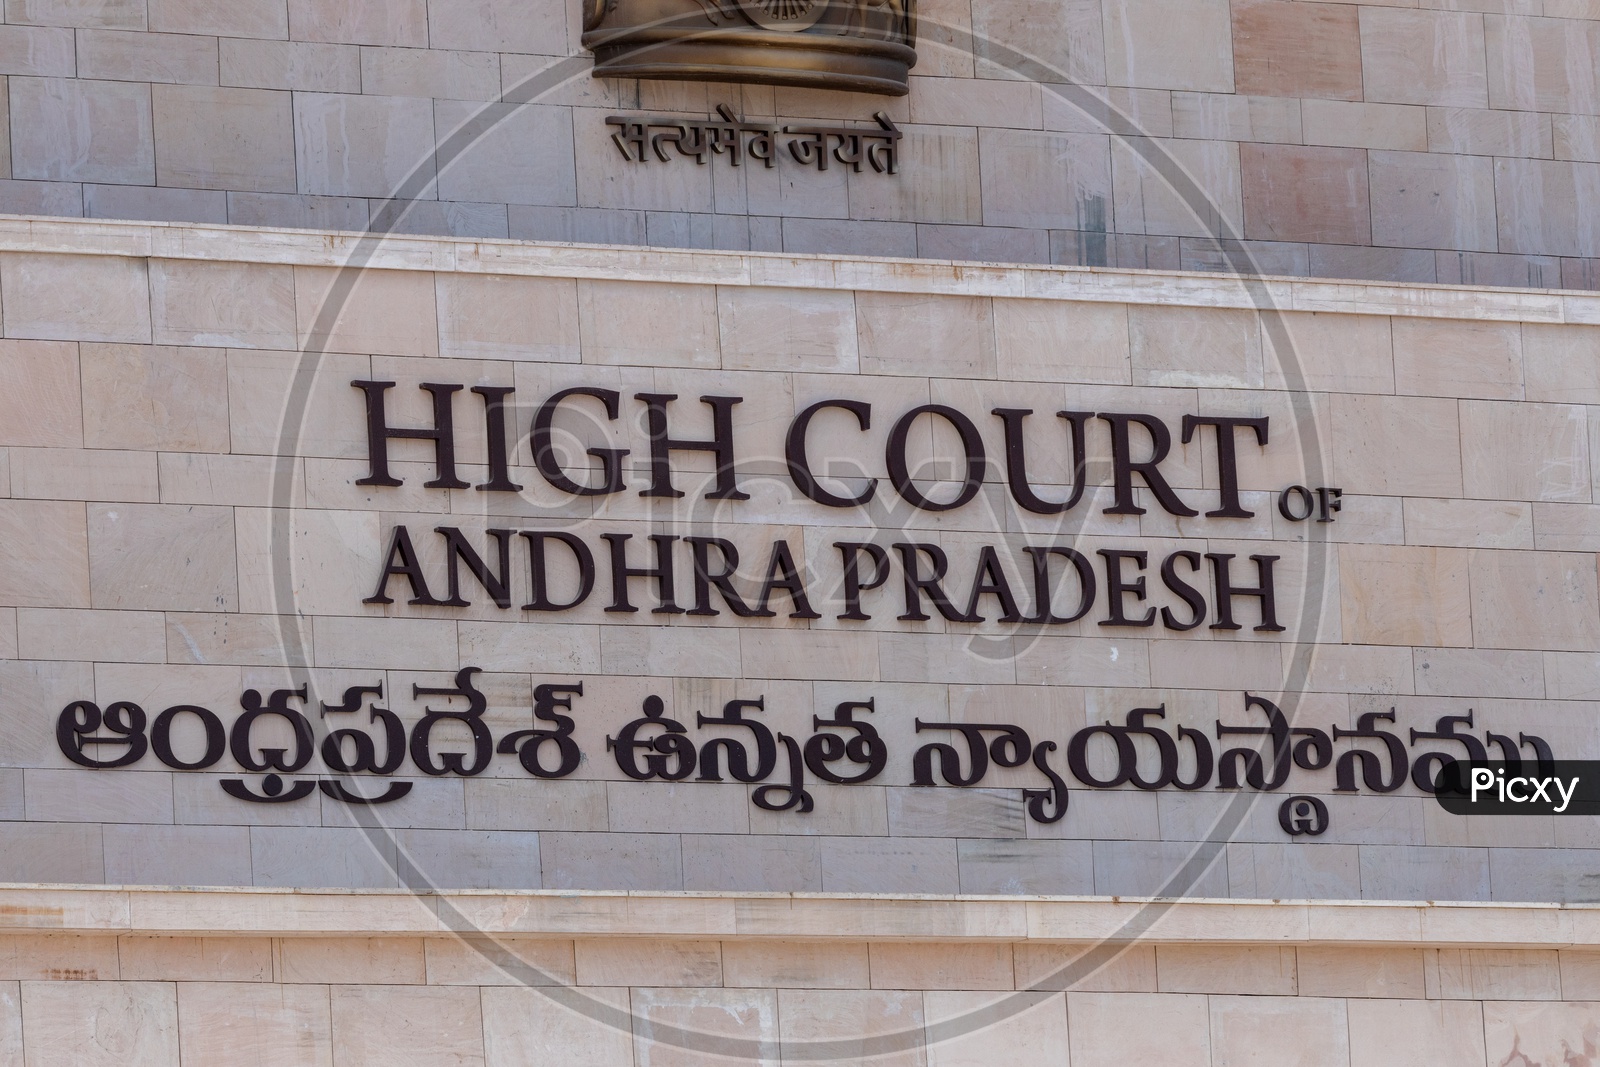 High Court of Andhra Pradesh engraved on the wall